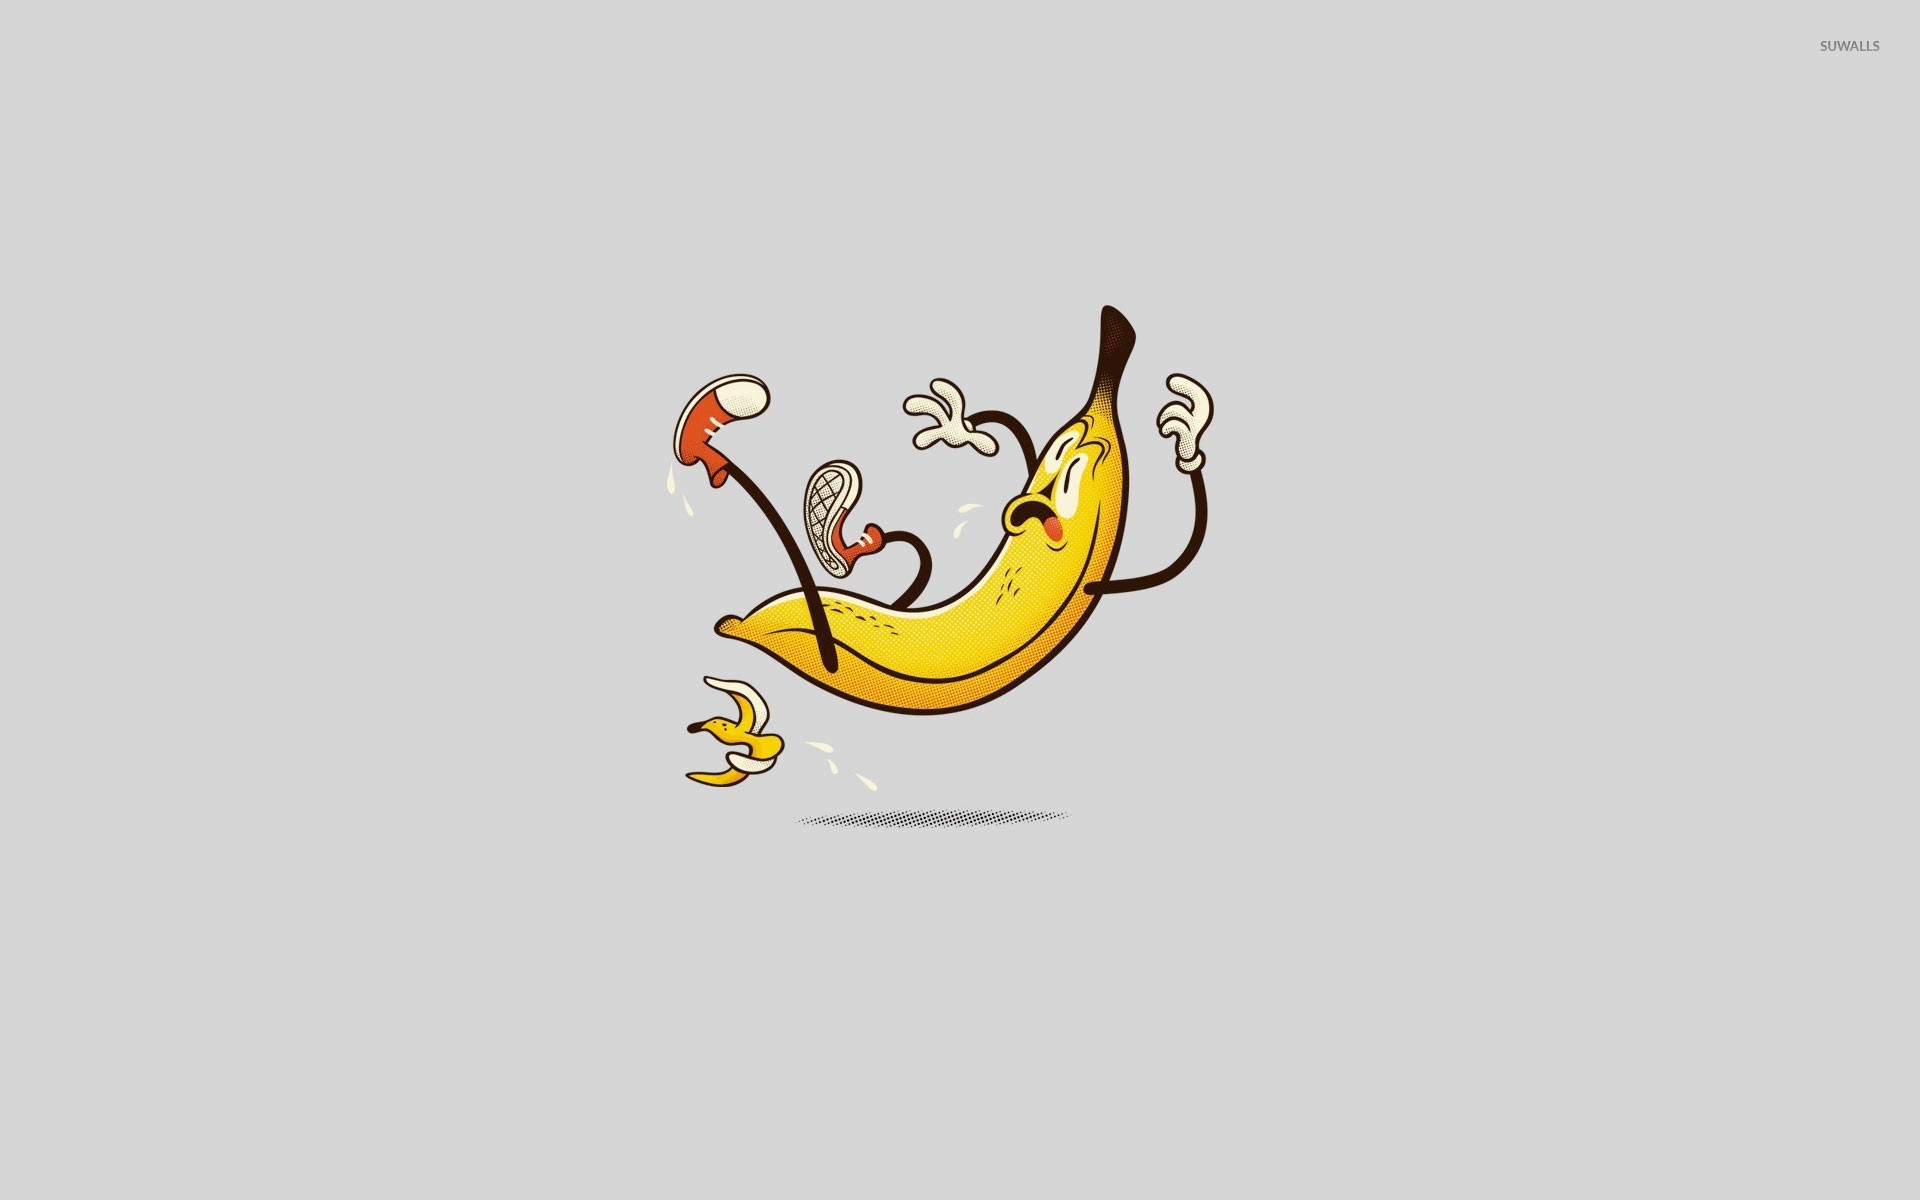 Banana slipping on a peal wallpaper   Funny wallpapers   20581